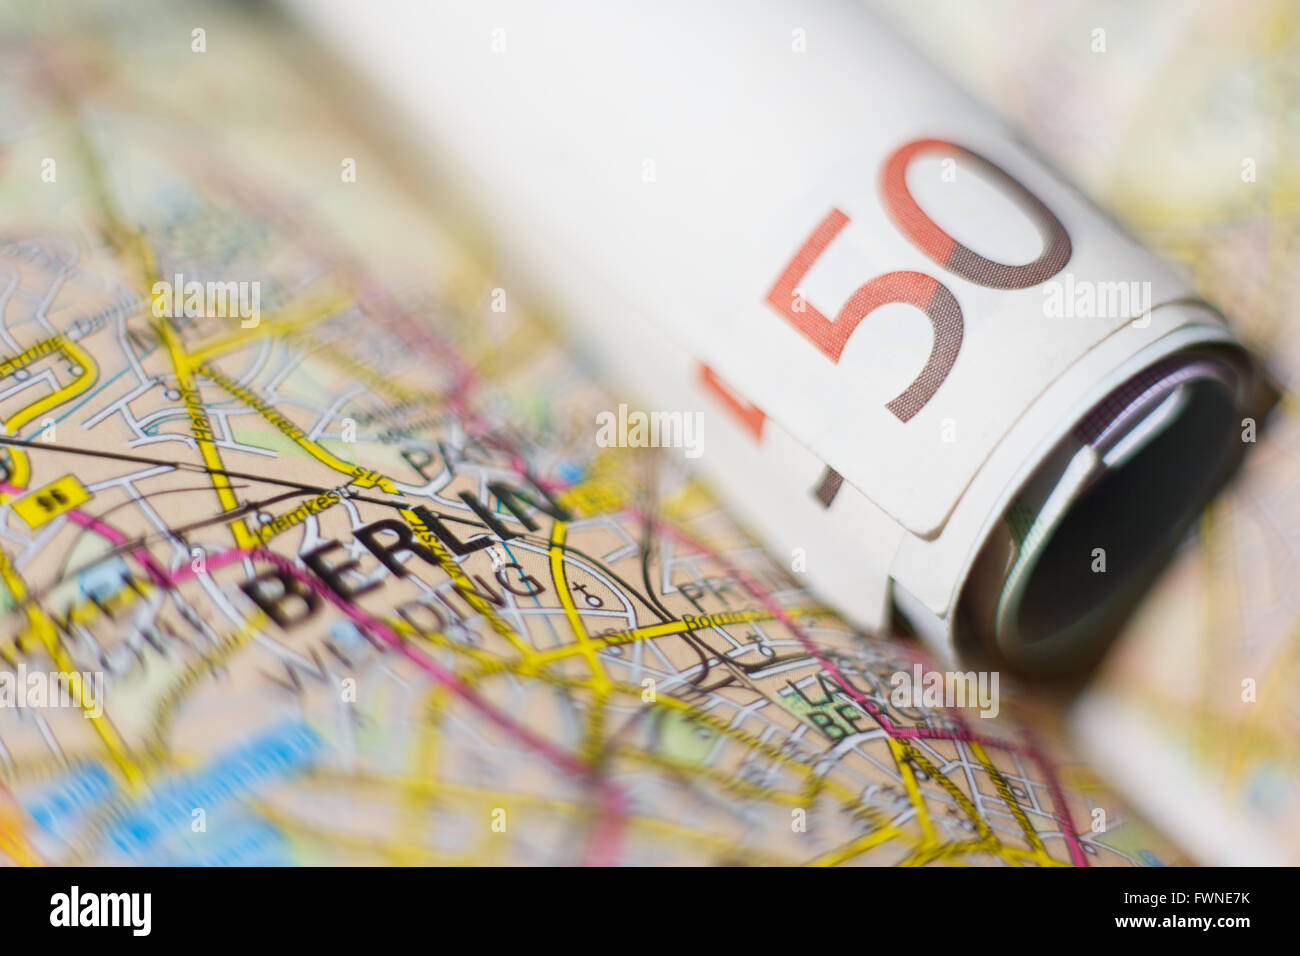 Euro banknotes on a geographical map of Berlin, Germany Stock Photo